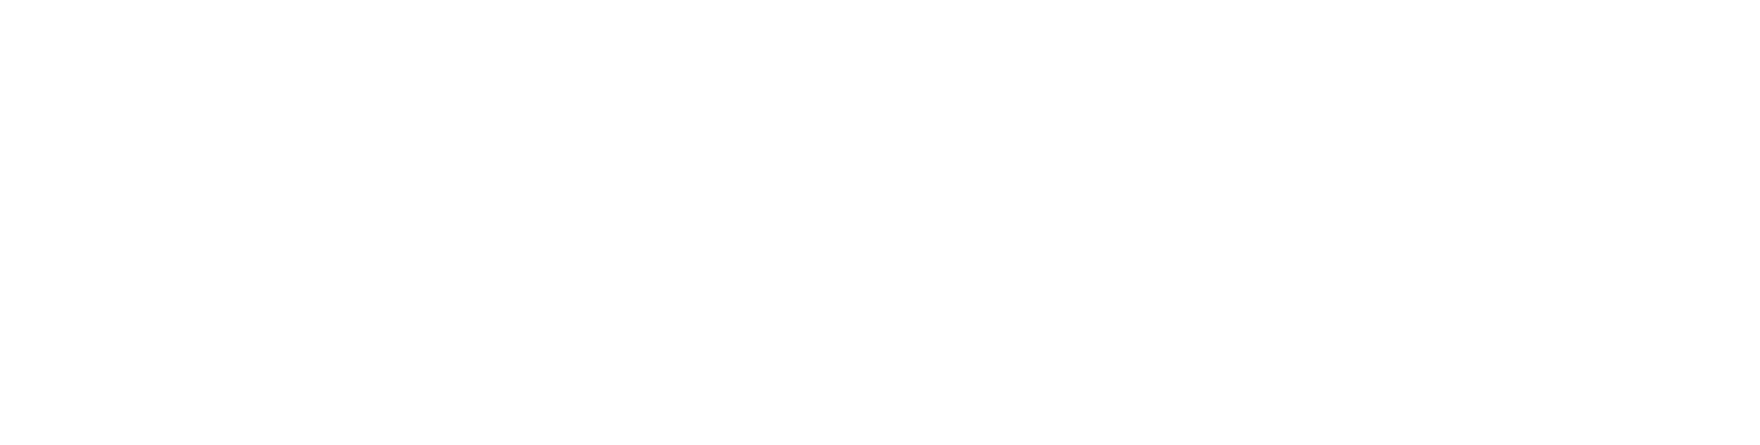 Mrs Top of The World Queen